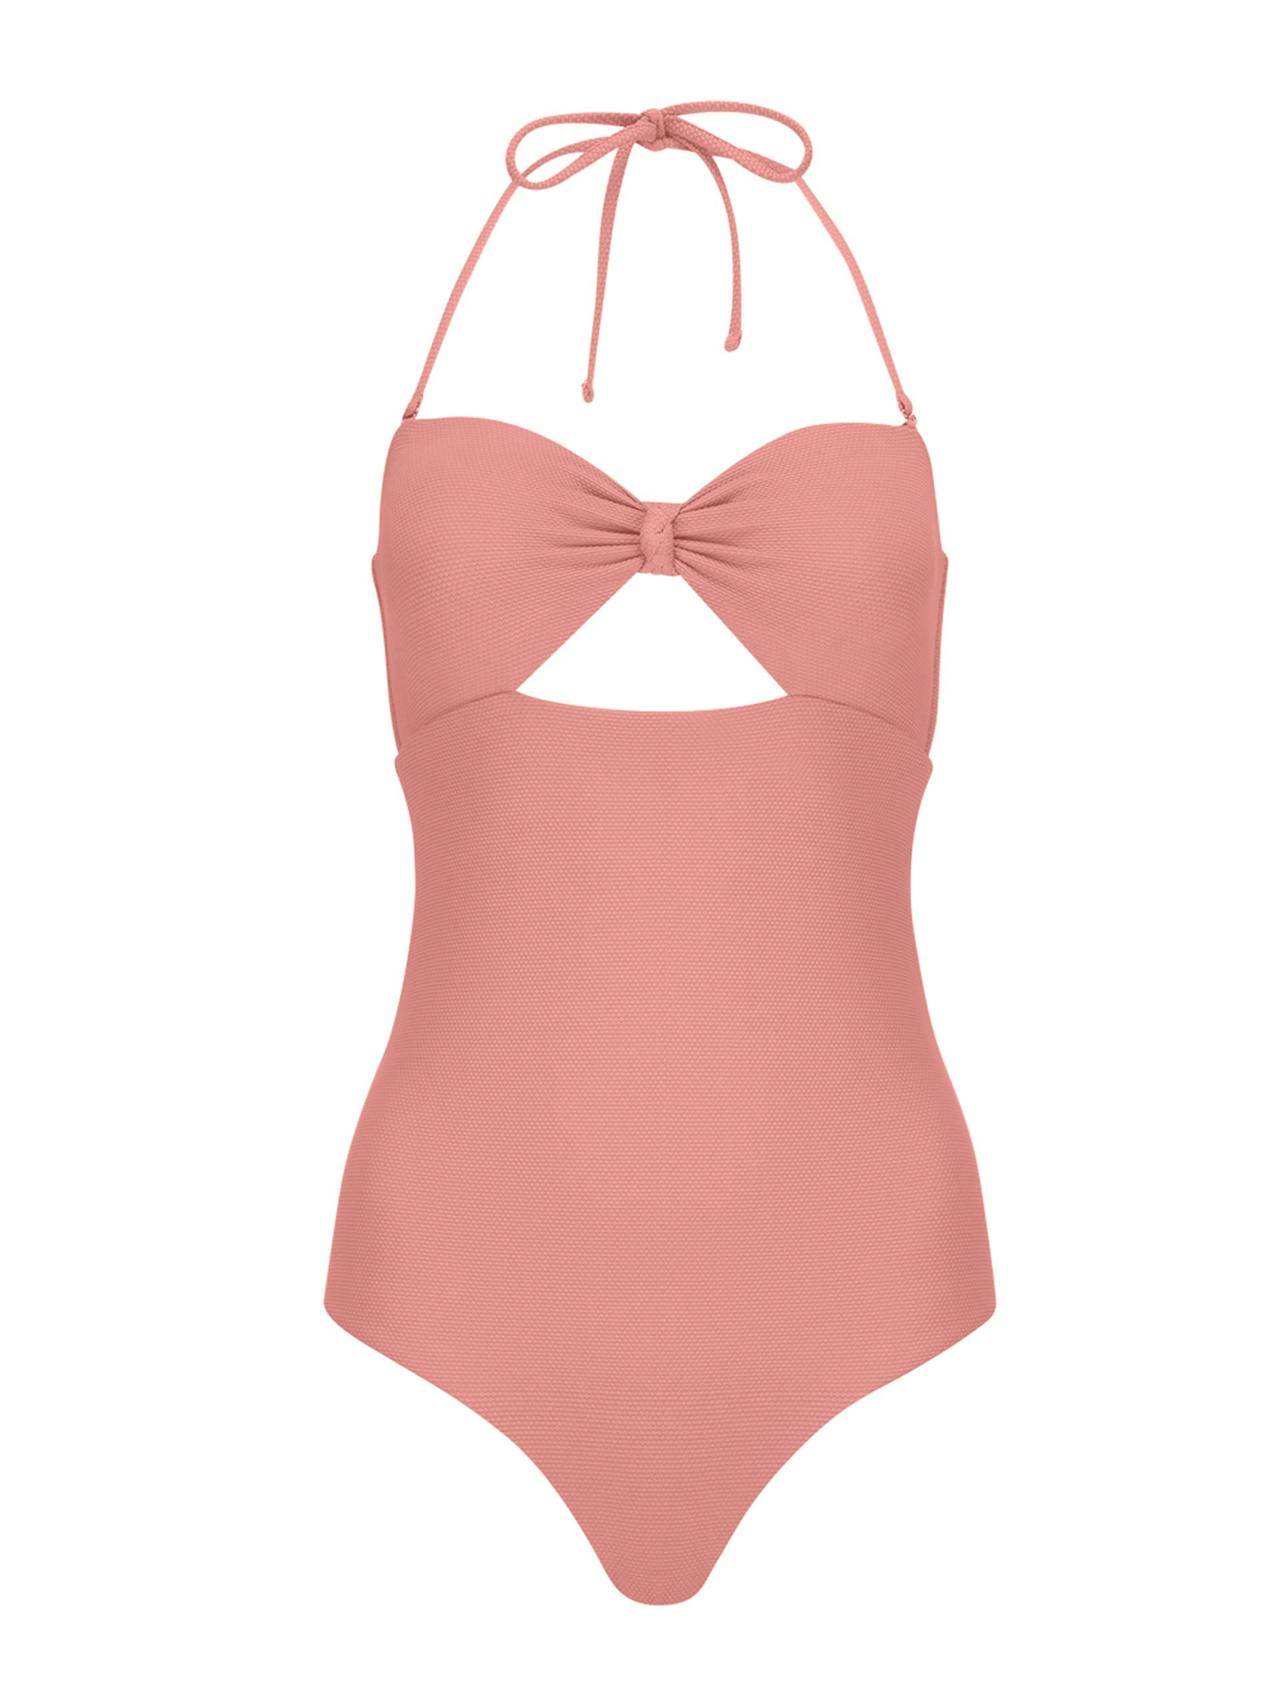 The Chazzy swimsuit in rose